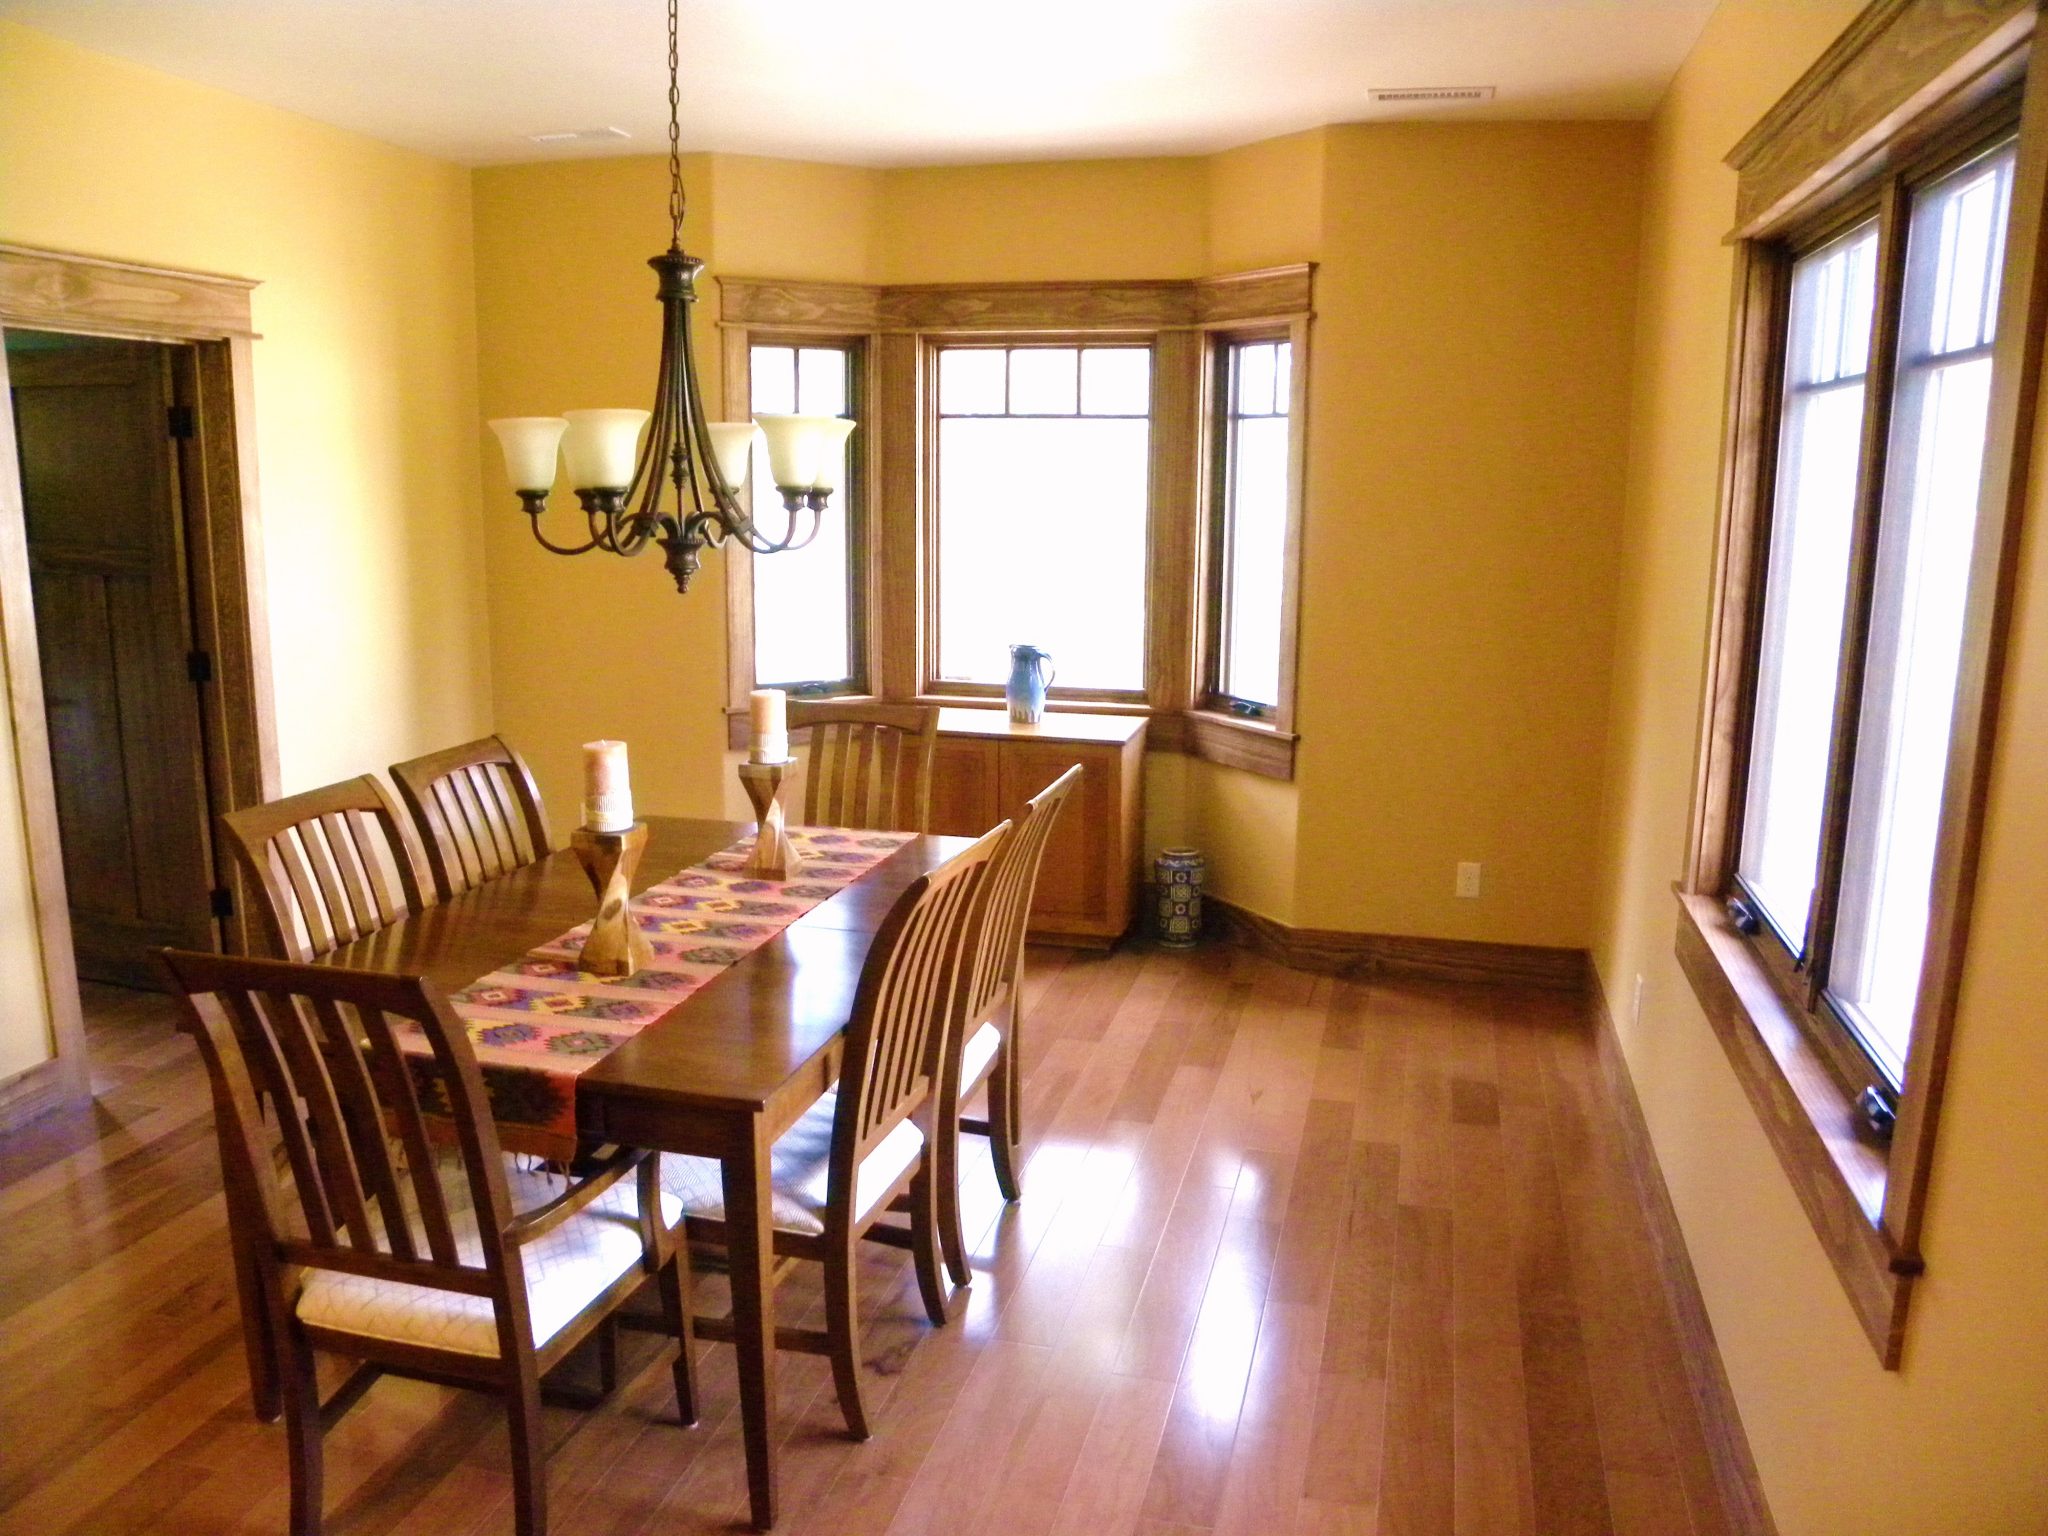 A newly remodeled dining room with wood trimmed windows and new flooring